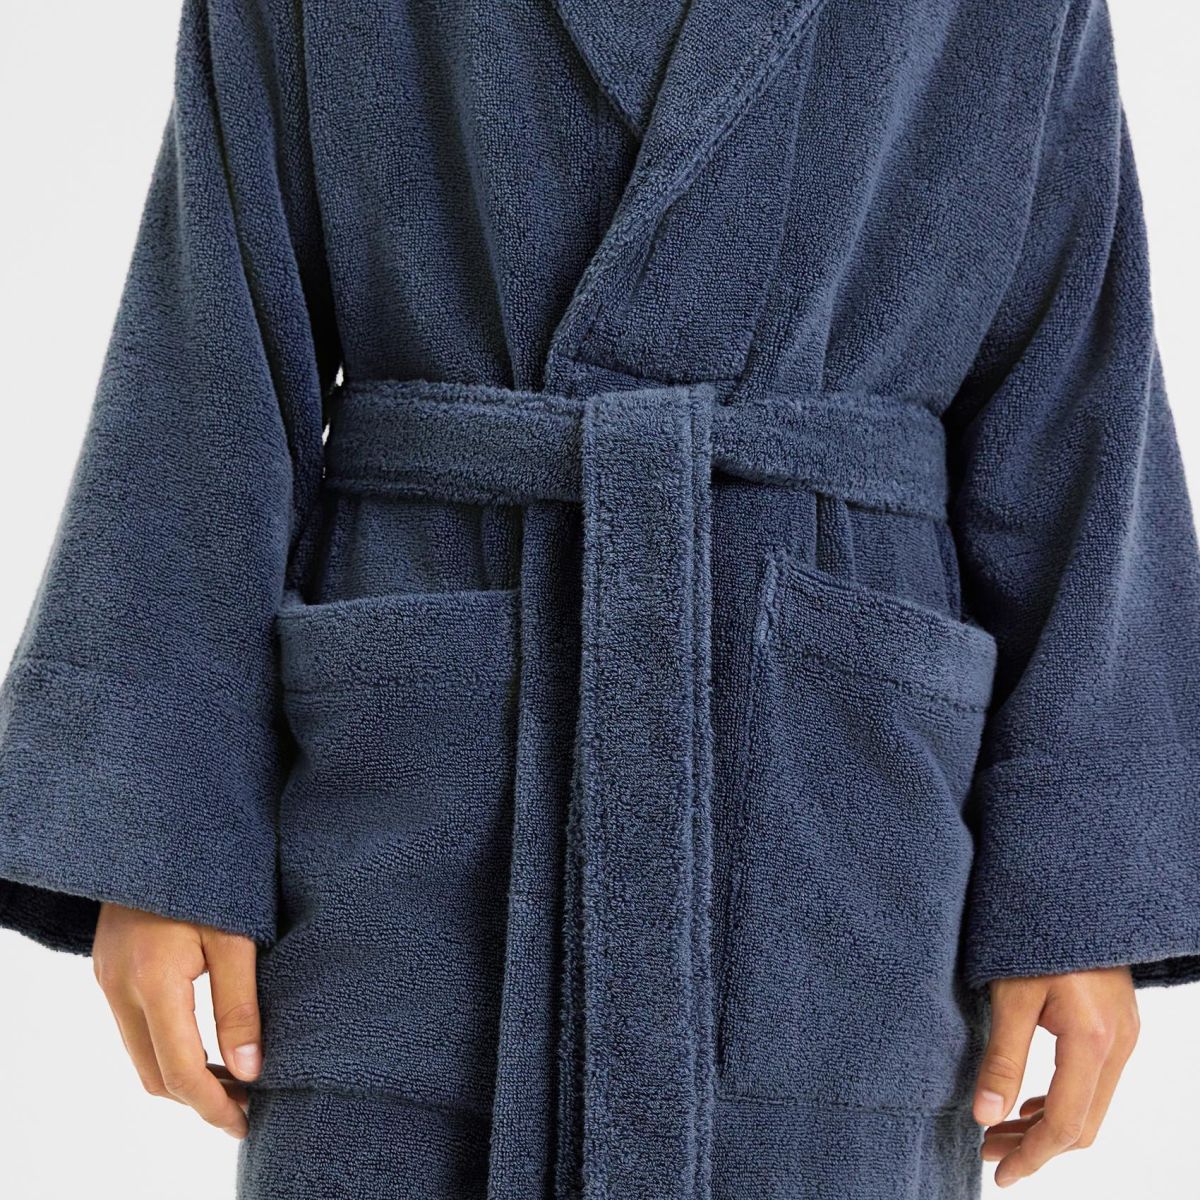 Robes, Bathrobes & Dressing Gowns | Bed Bath N' Table